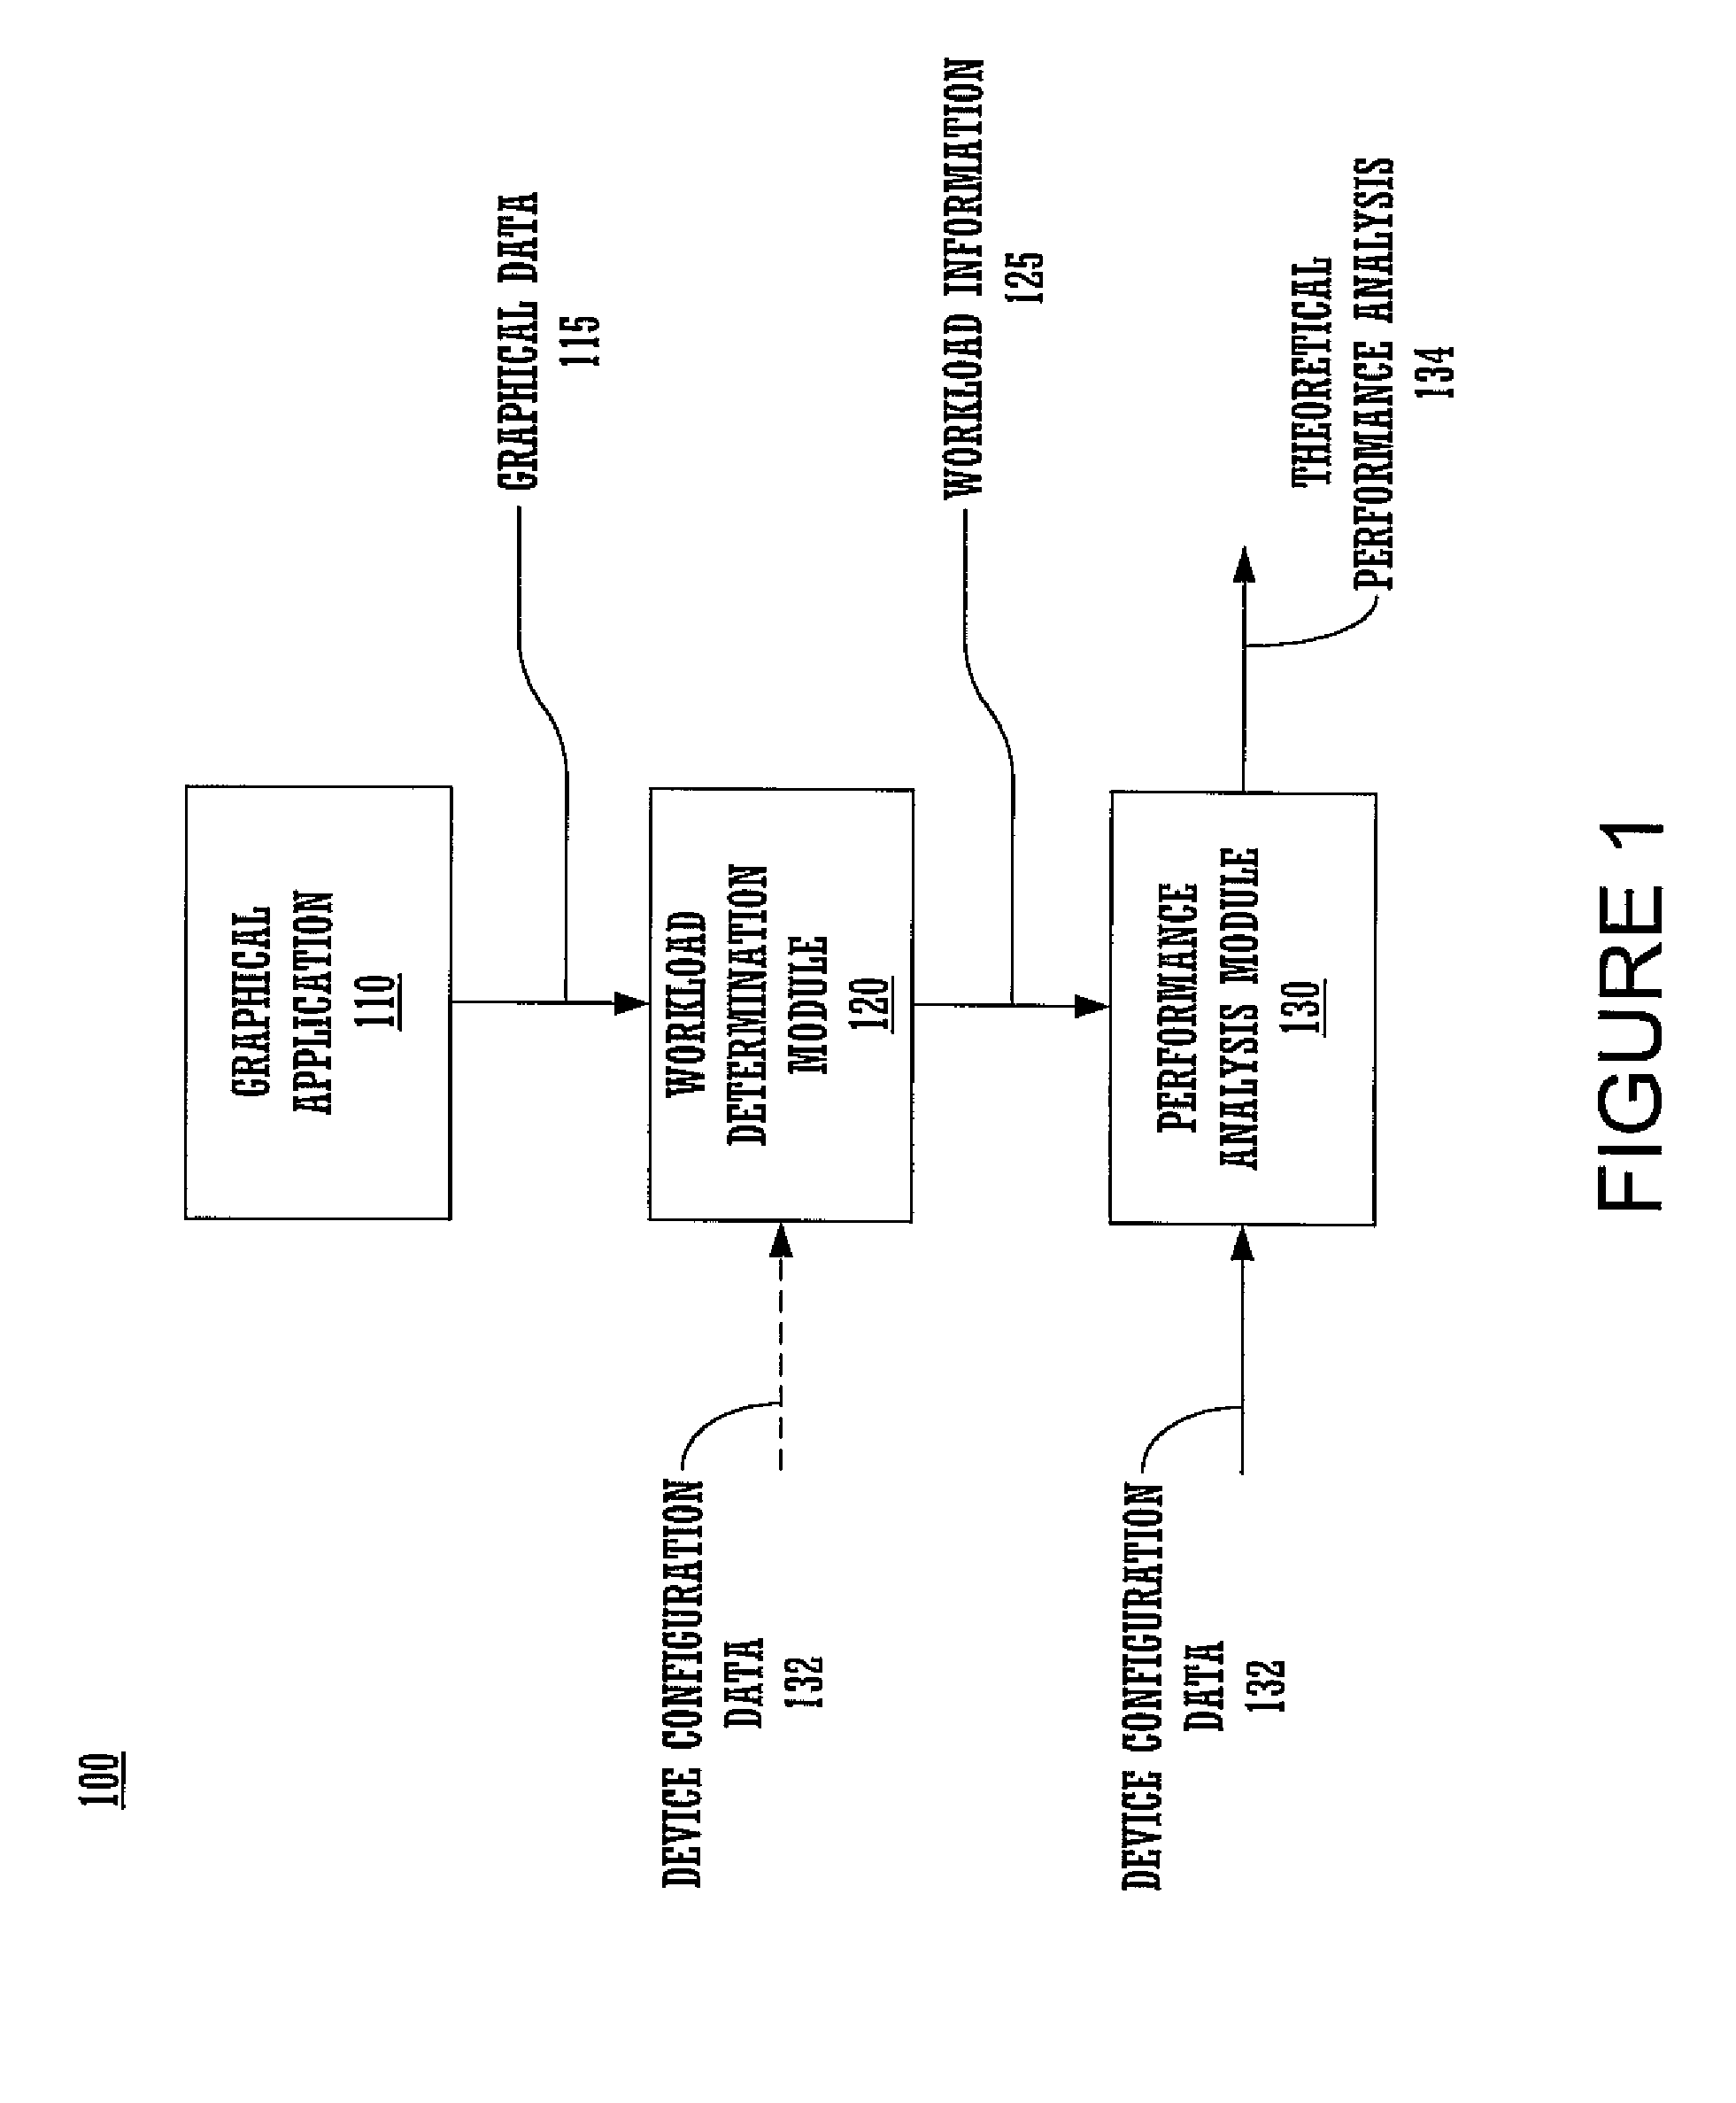 Automated generation of theoretical performance analysis based upon workload and design configuration